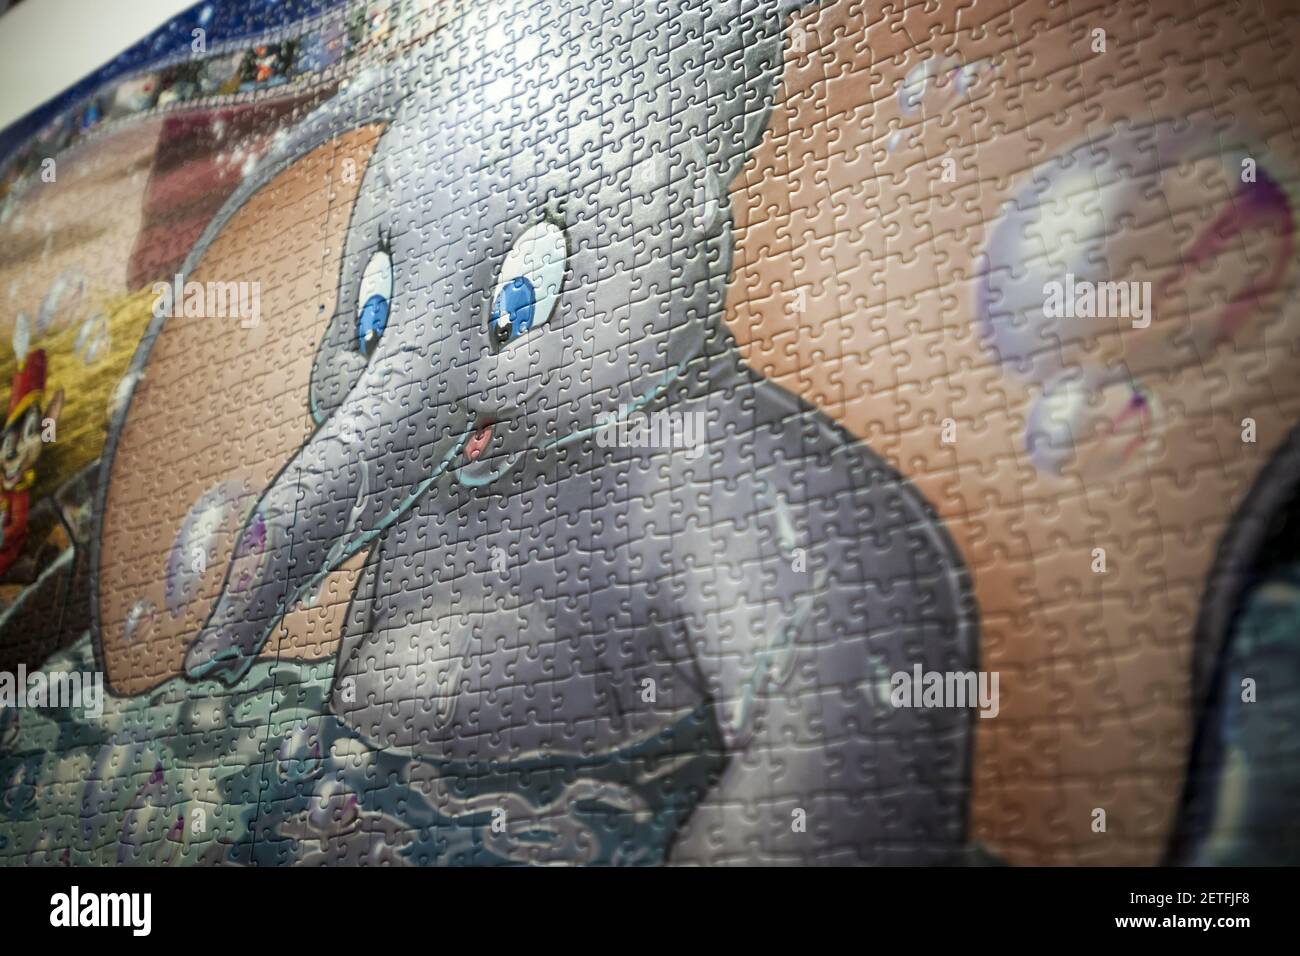 Detail of Ravensburger's "Memorable Disney Moments" world record setting jigsaw  puzzle at the 114th North American International Toy Fair in the Jacob  Javits Convention center in New York on Sunday, February 19,